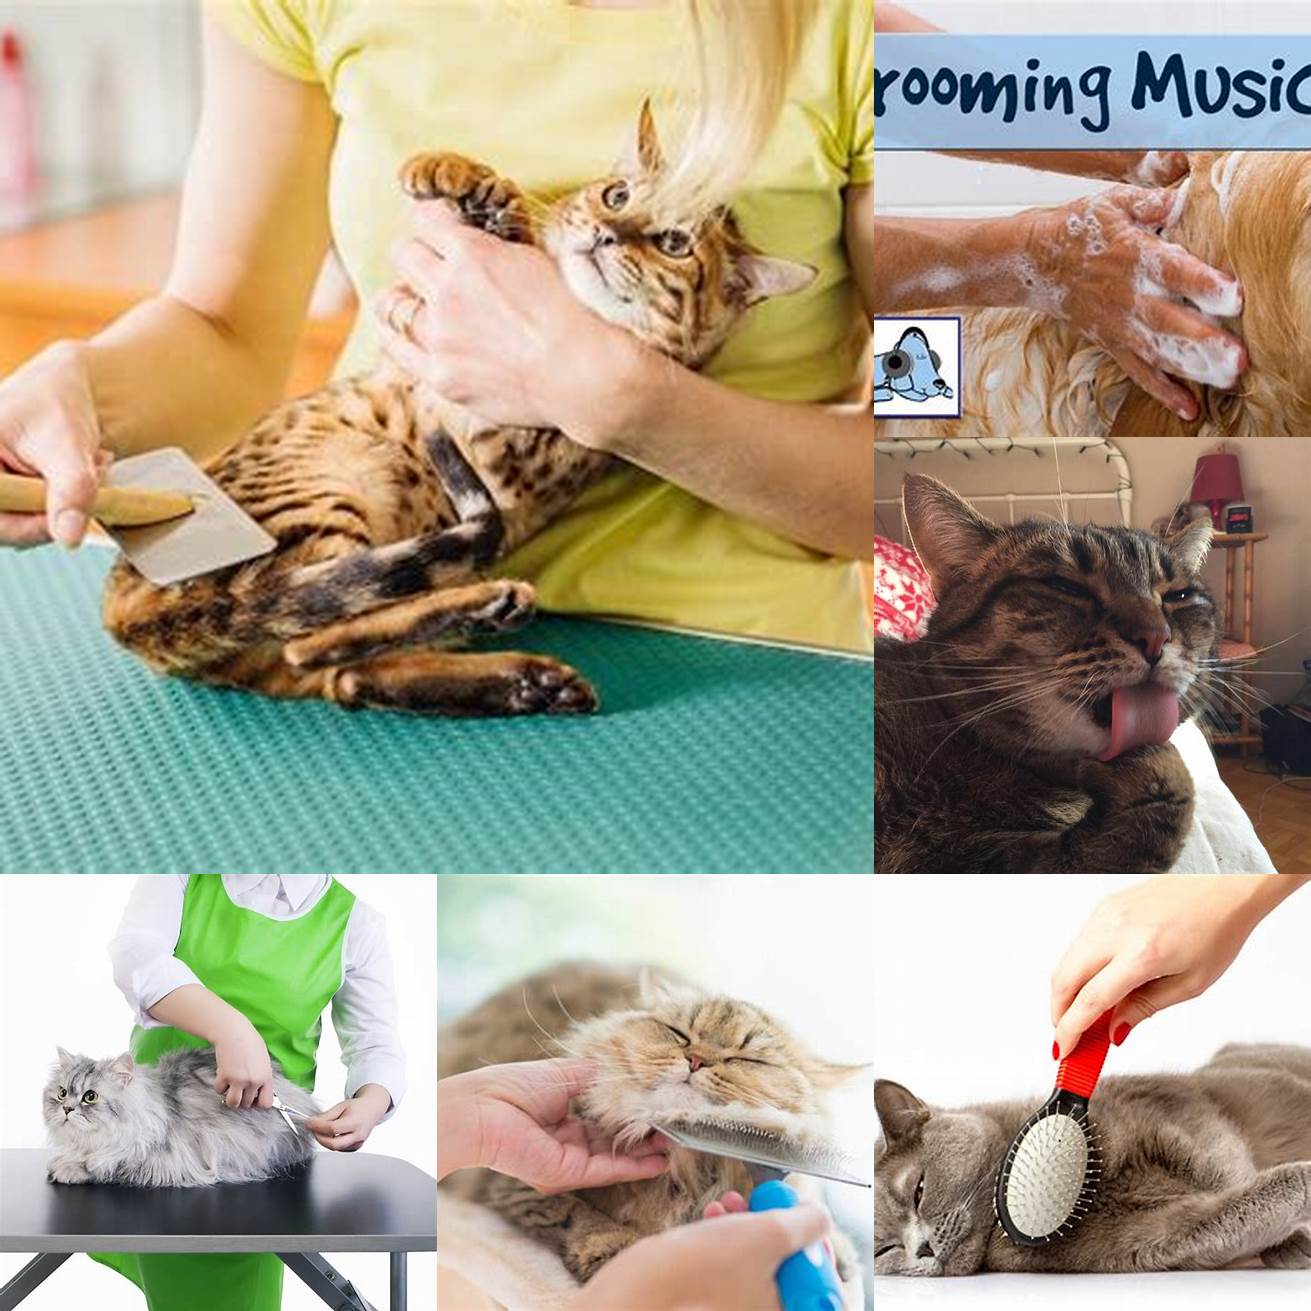 Play Music During Grooming Sessions